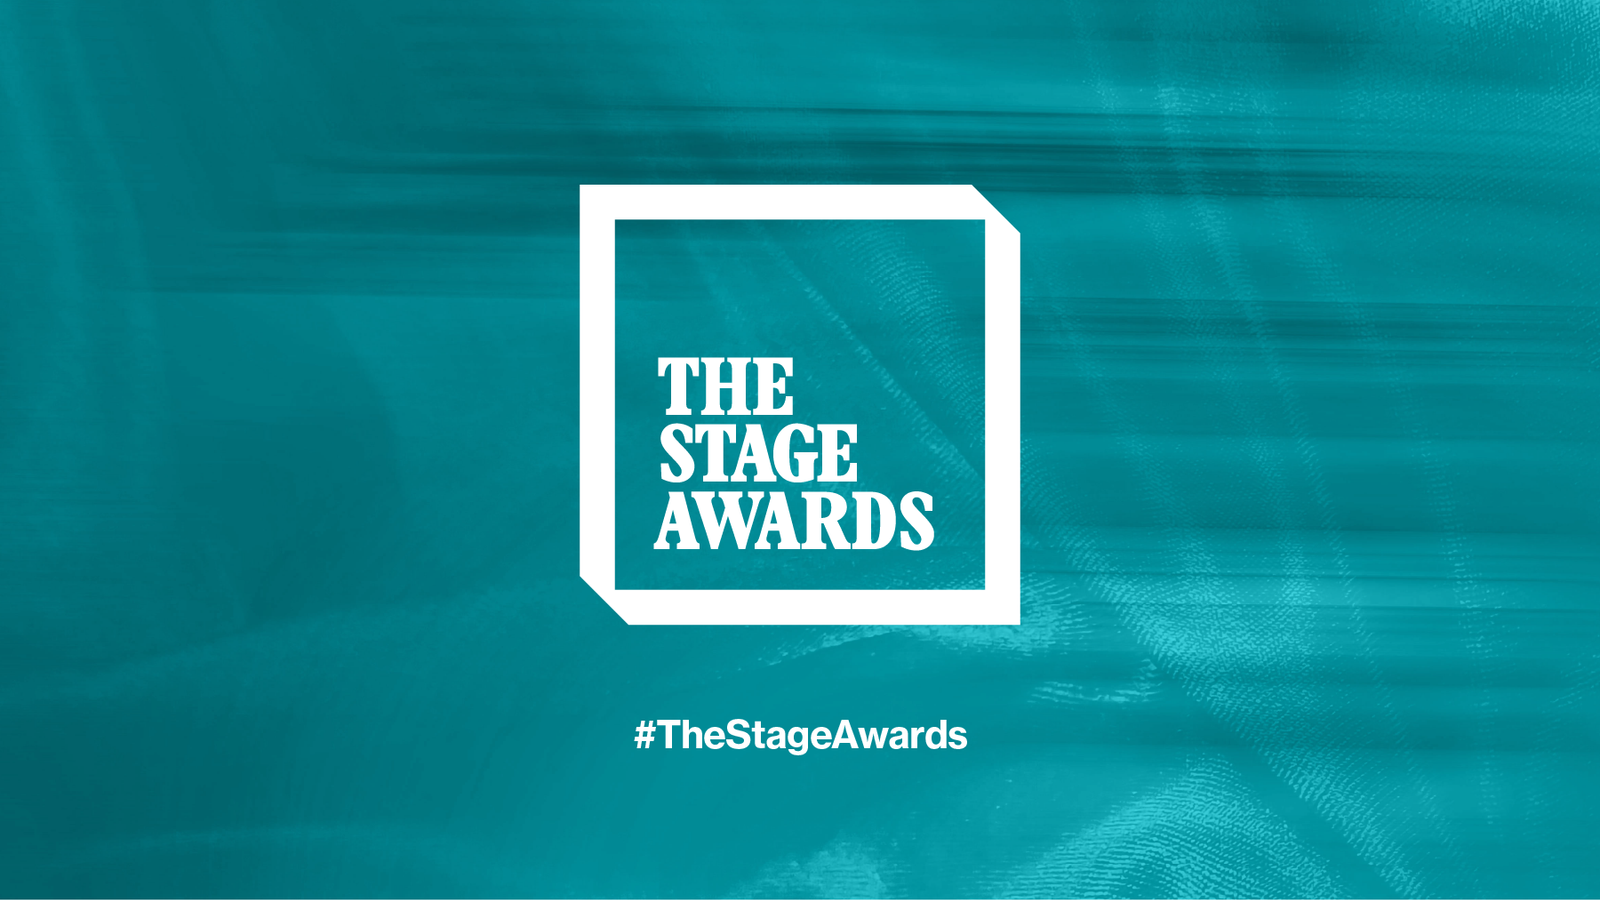 YOUR NEWS<br />The Stage Awards 2021